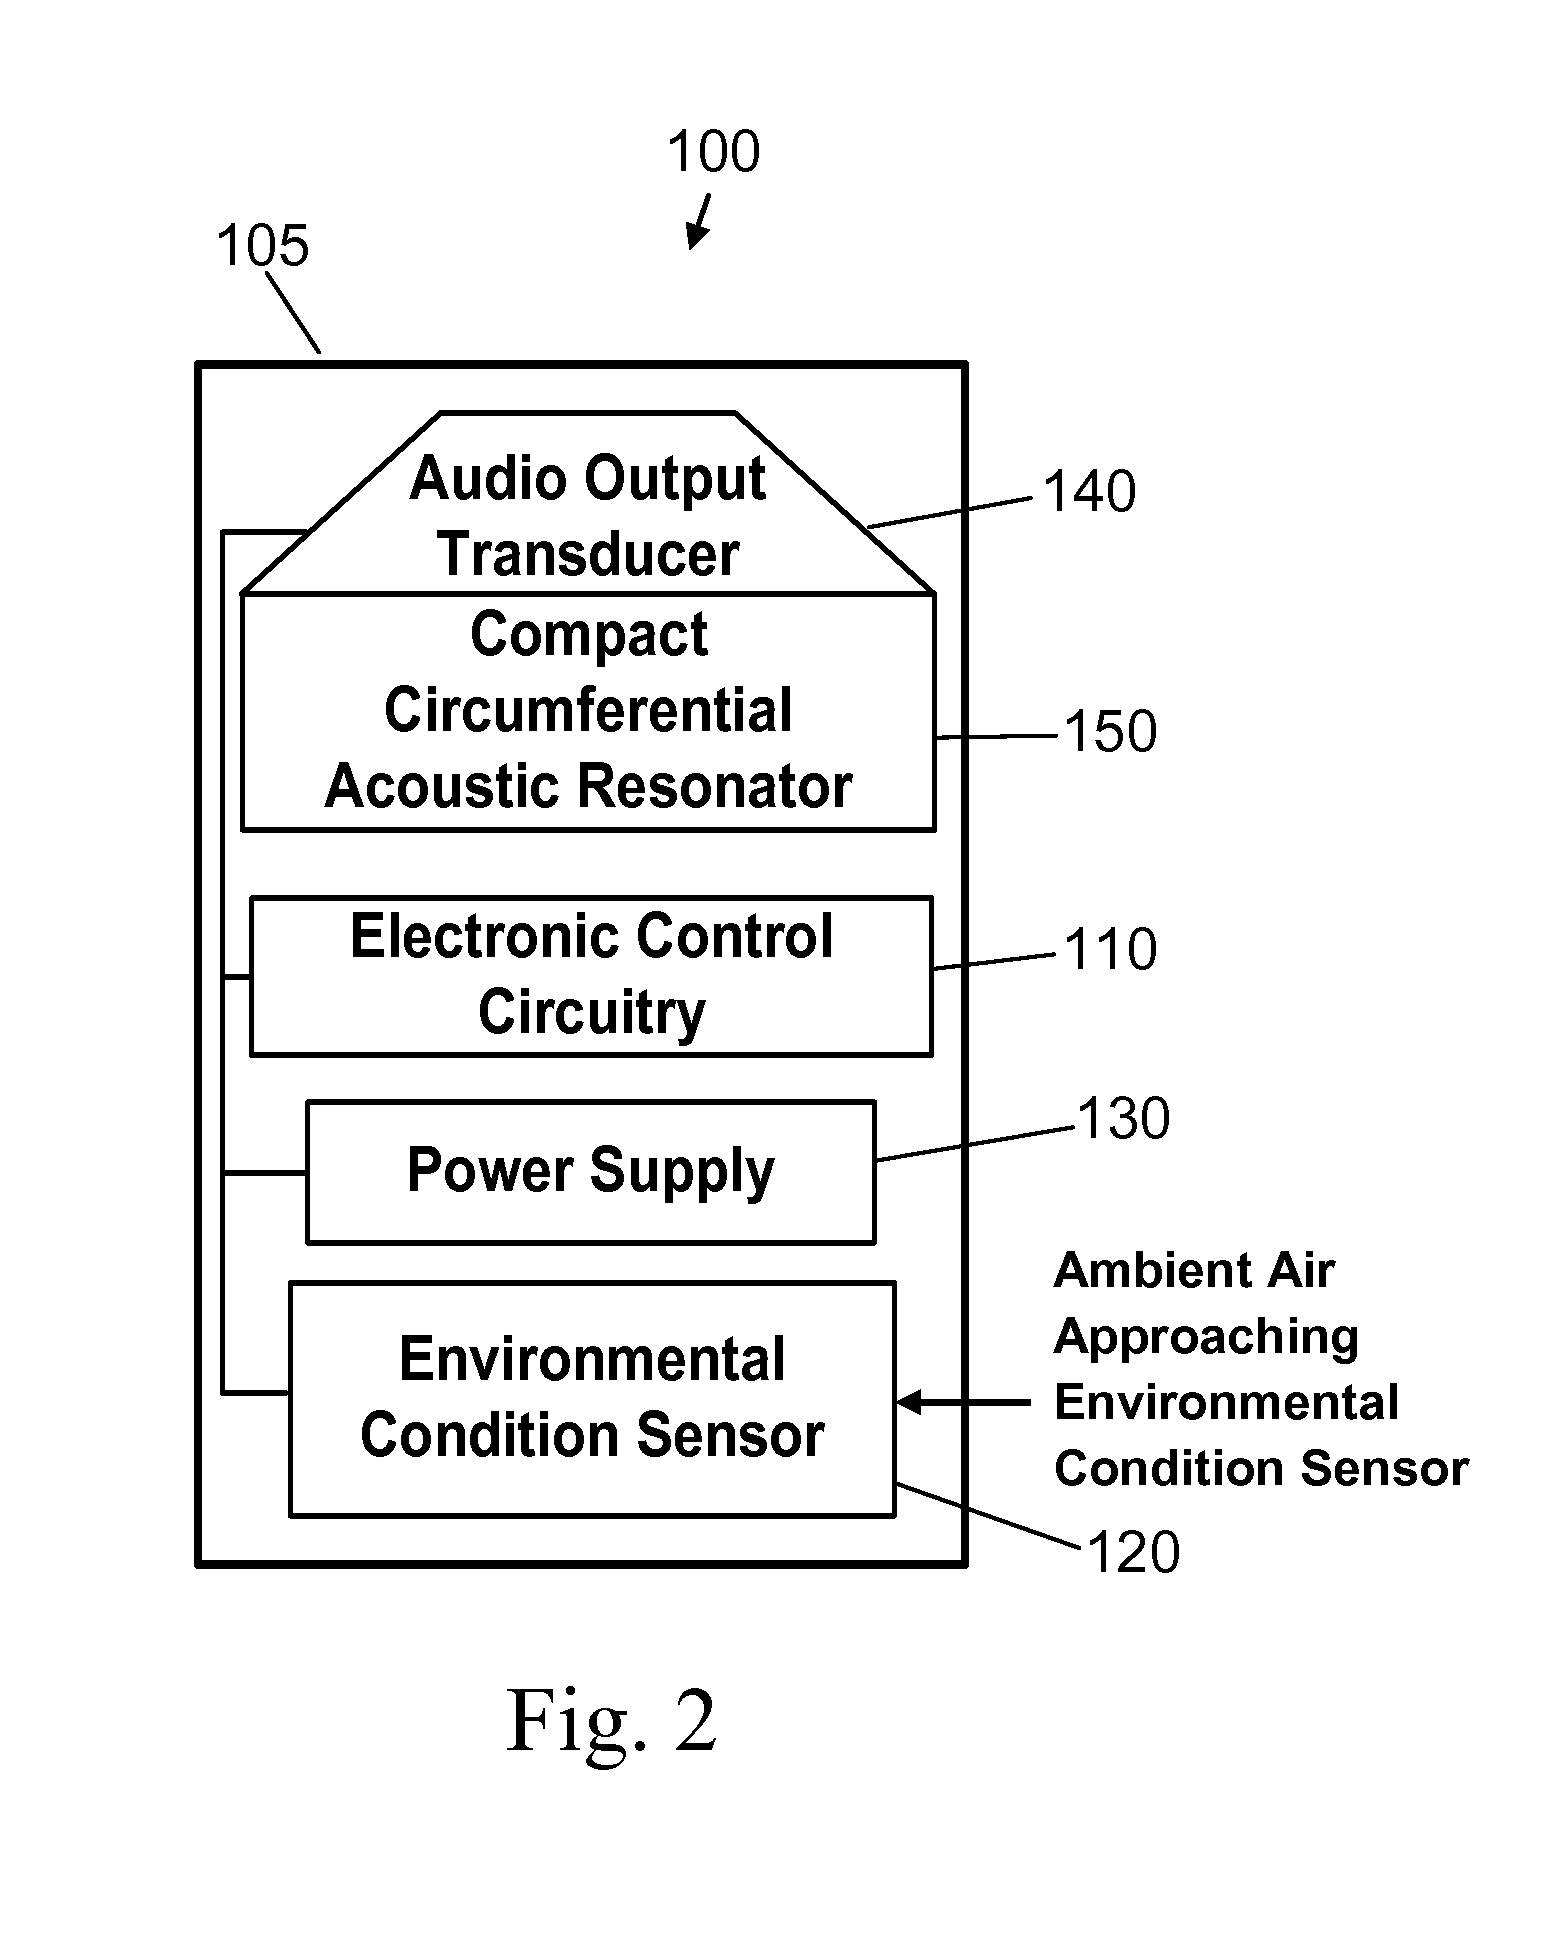 Life safety device with compact circumferential acoustic resonator